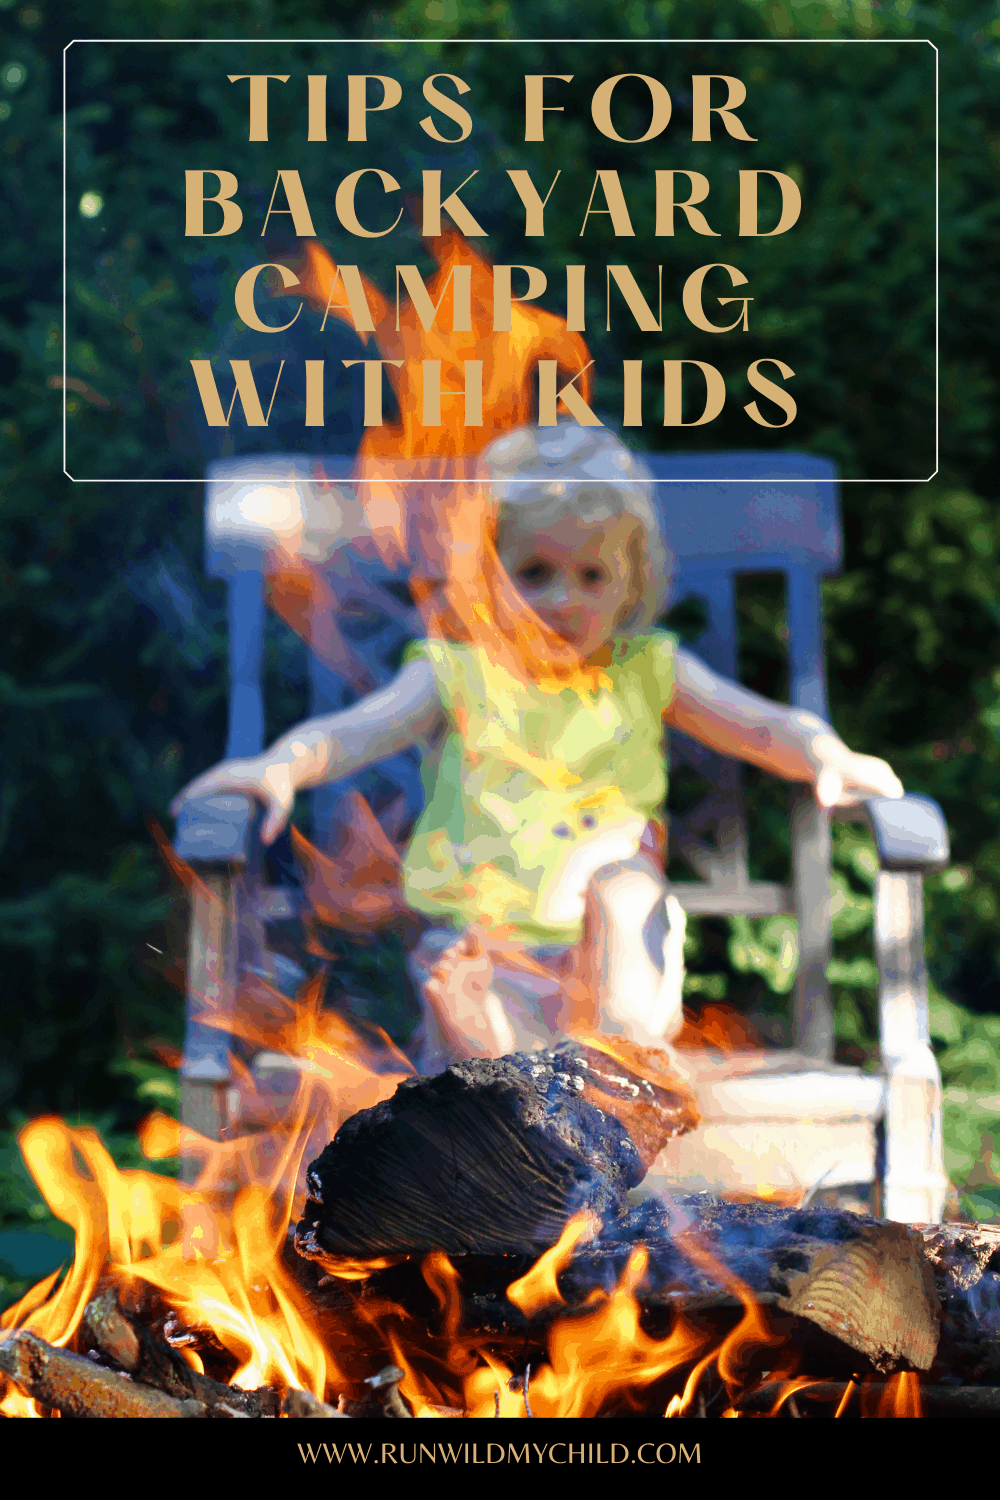 Tips for backyard camping with kids